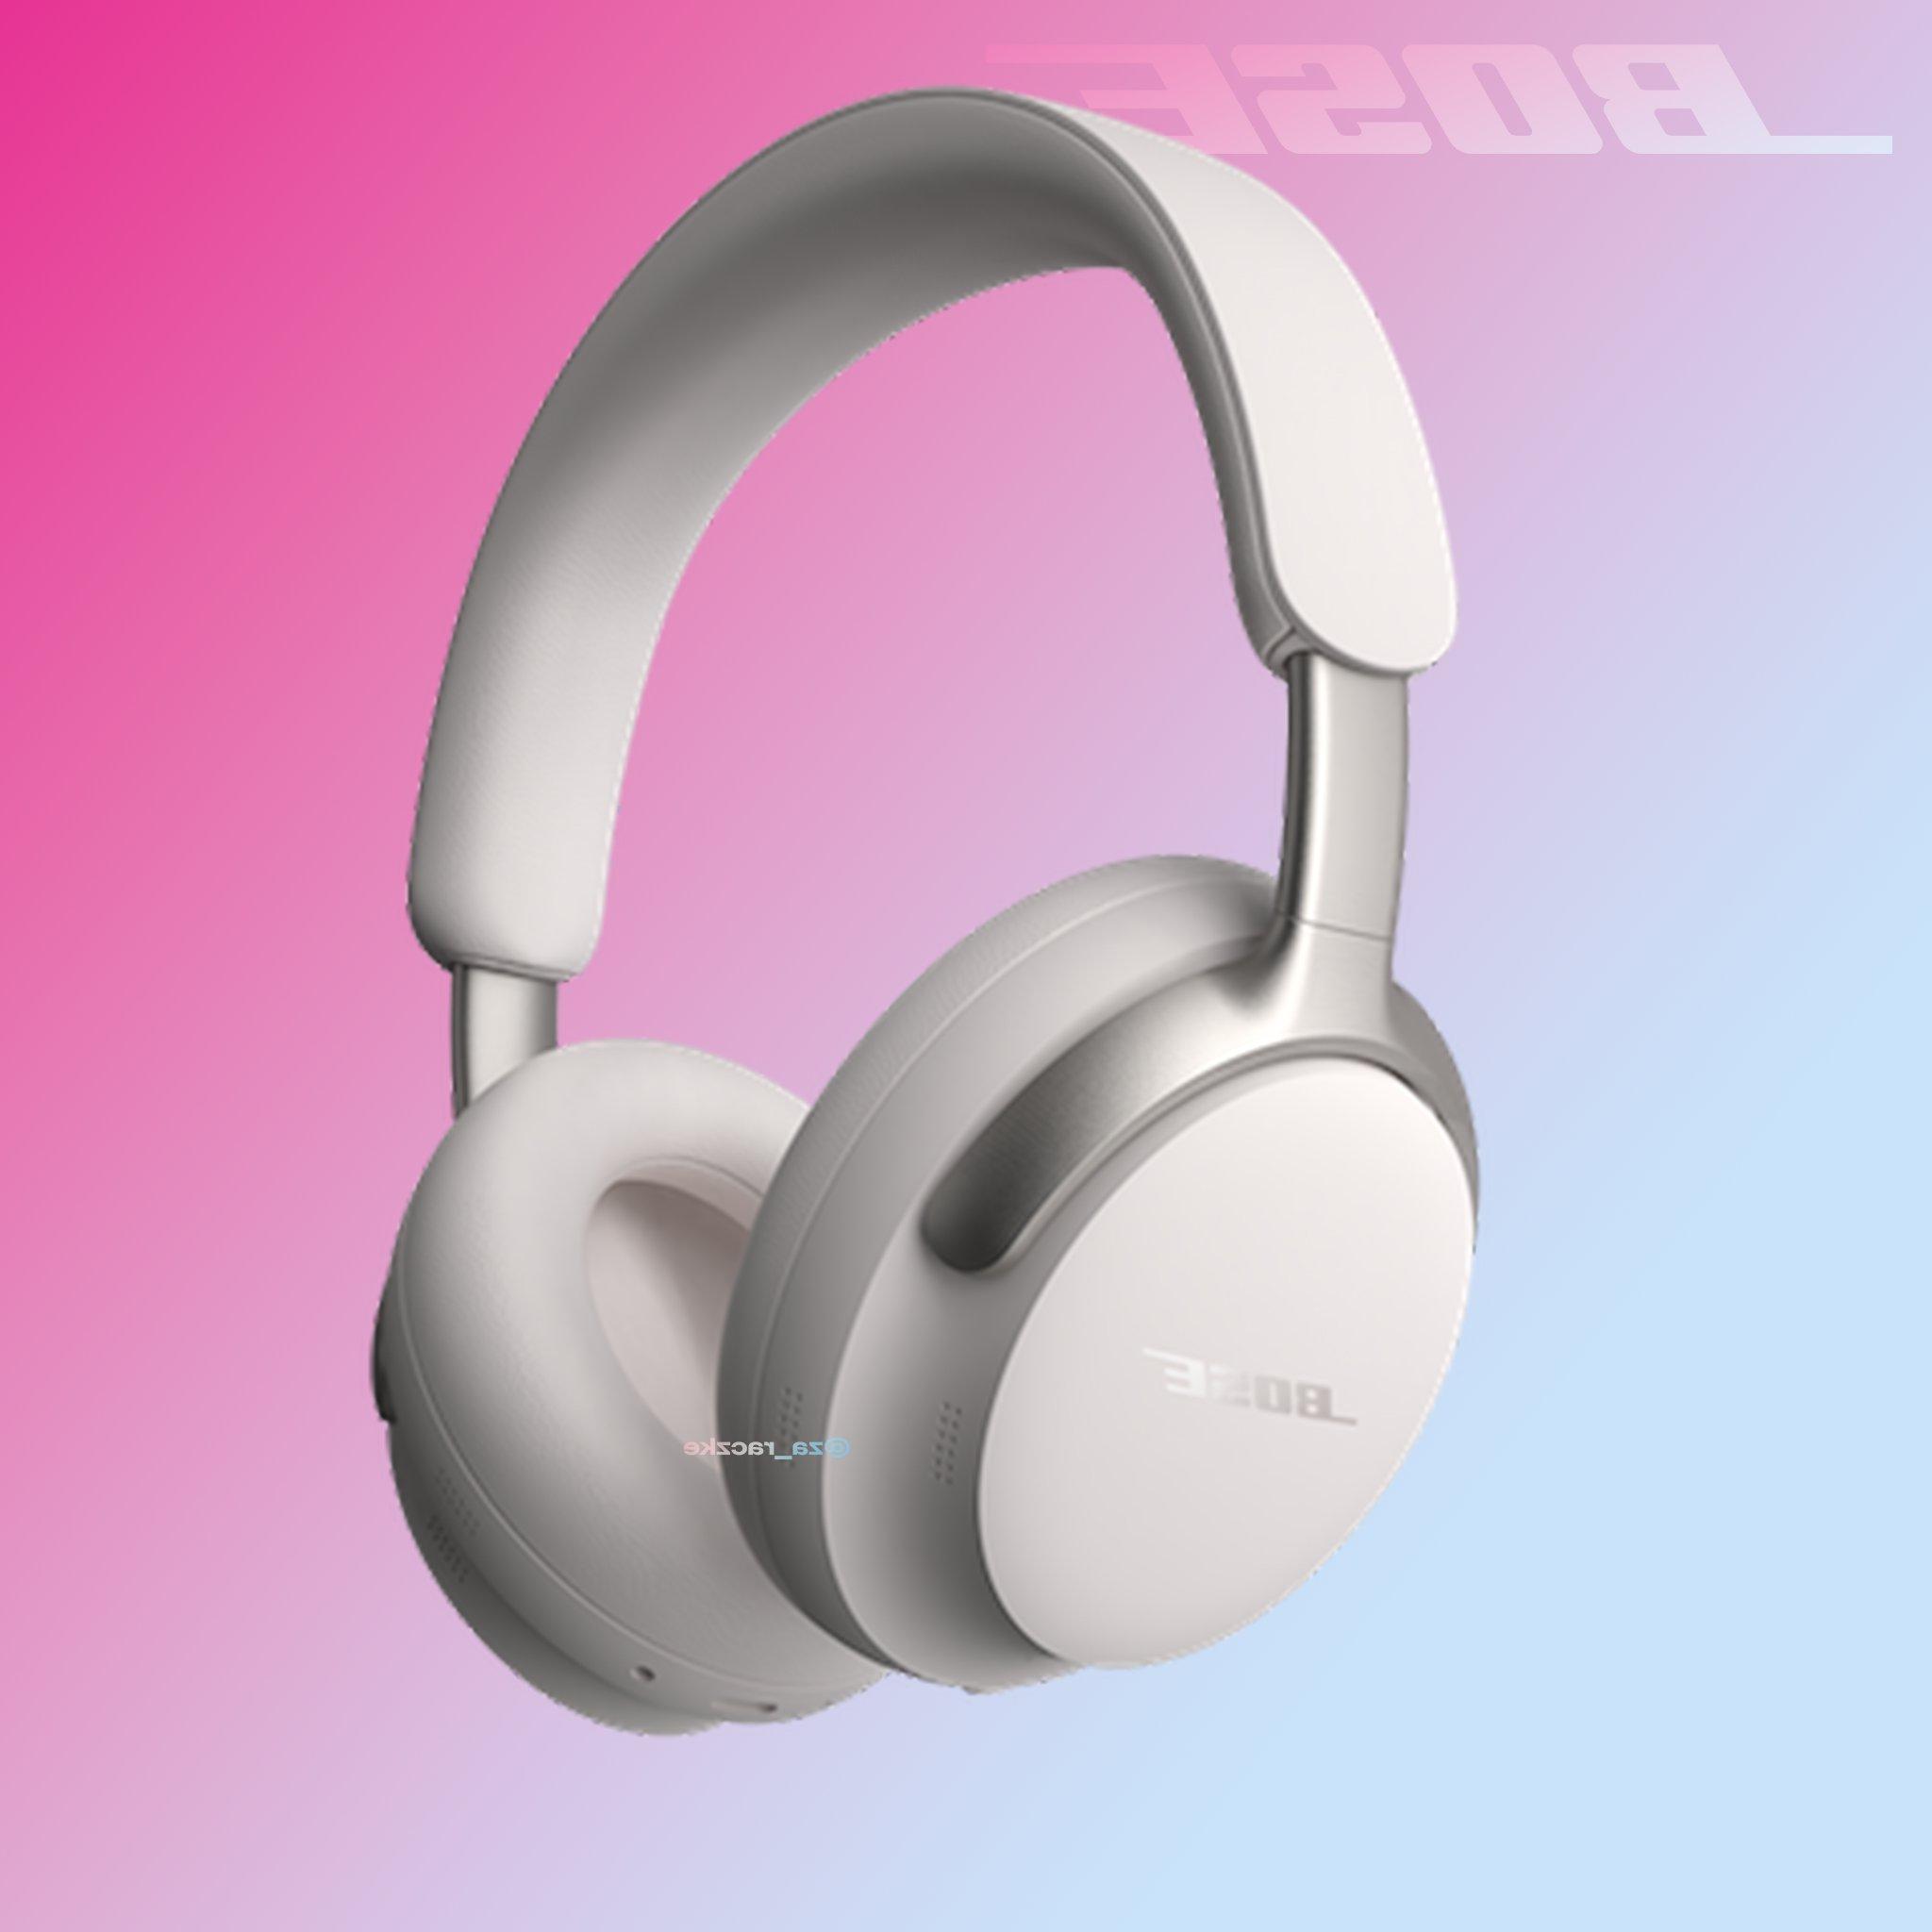 A second Bose QuietComfort Ultra rendering in White and Silver shared by Kuba Wojciechowski on Twitter